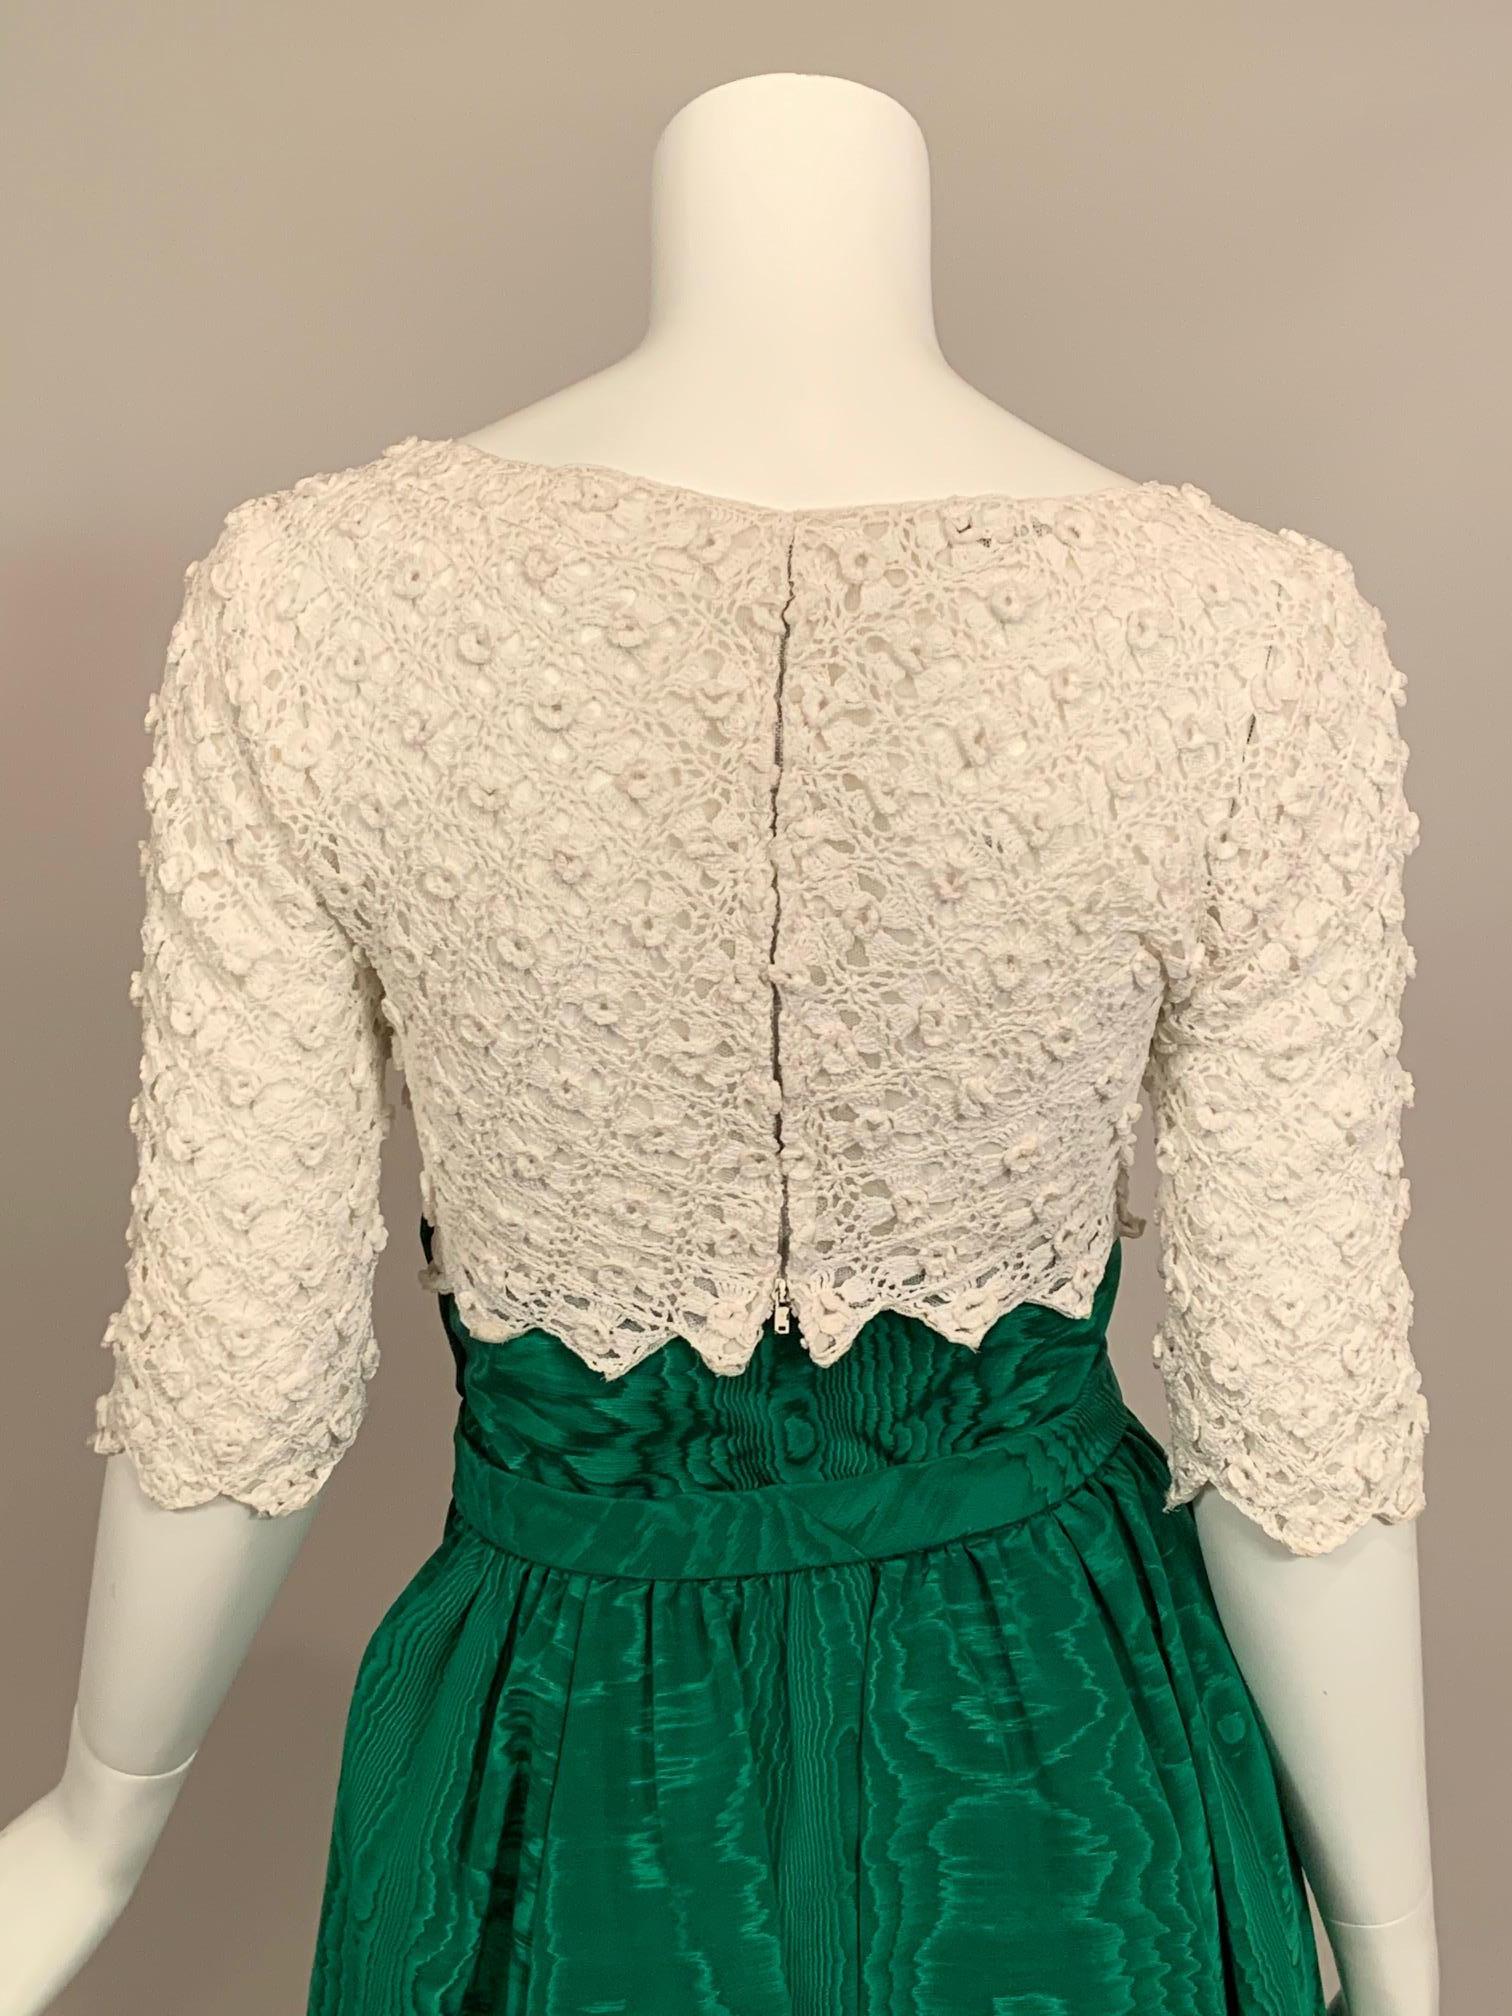 Sybil Connolly Couture Two Piece Dress  Irish Lace and Kelly Green Silk  1